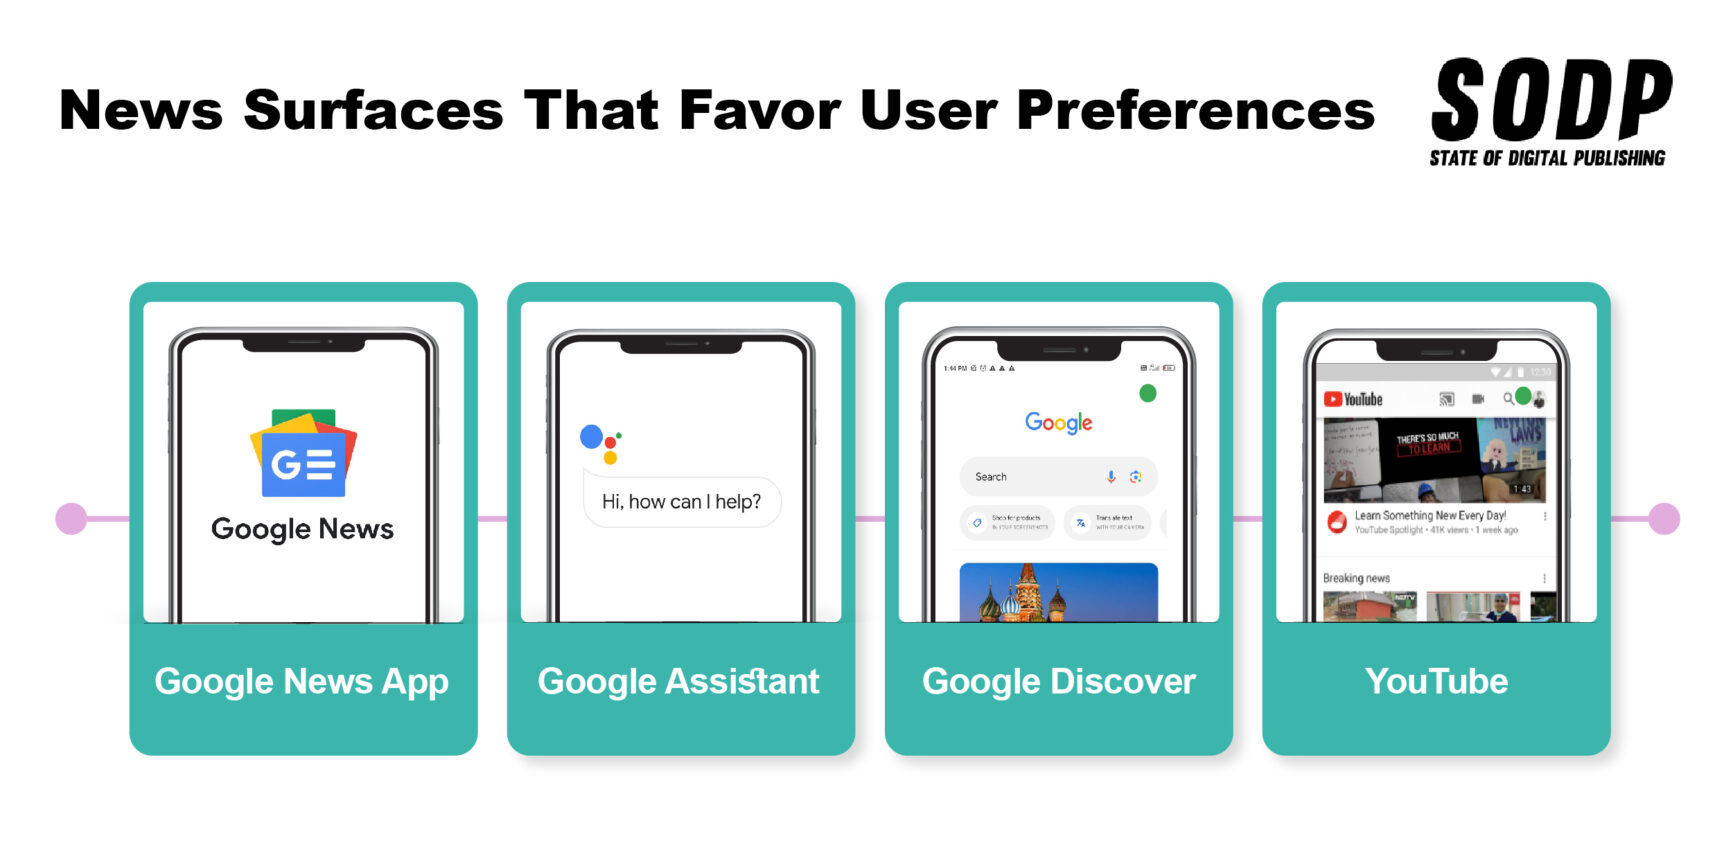 News Surfaces That Favor User Preferences